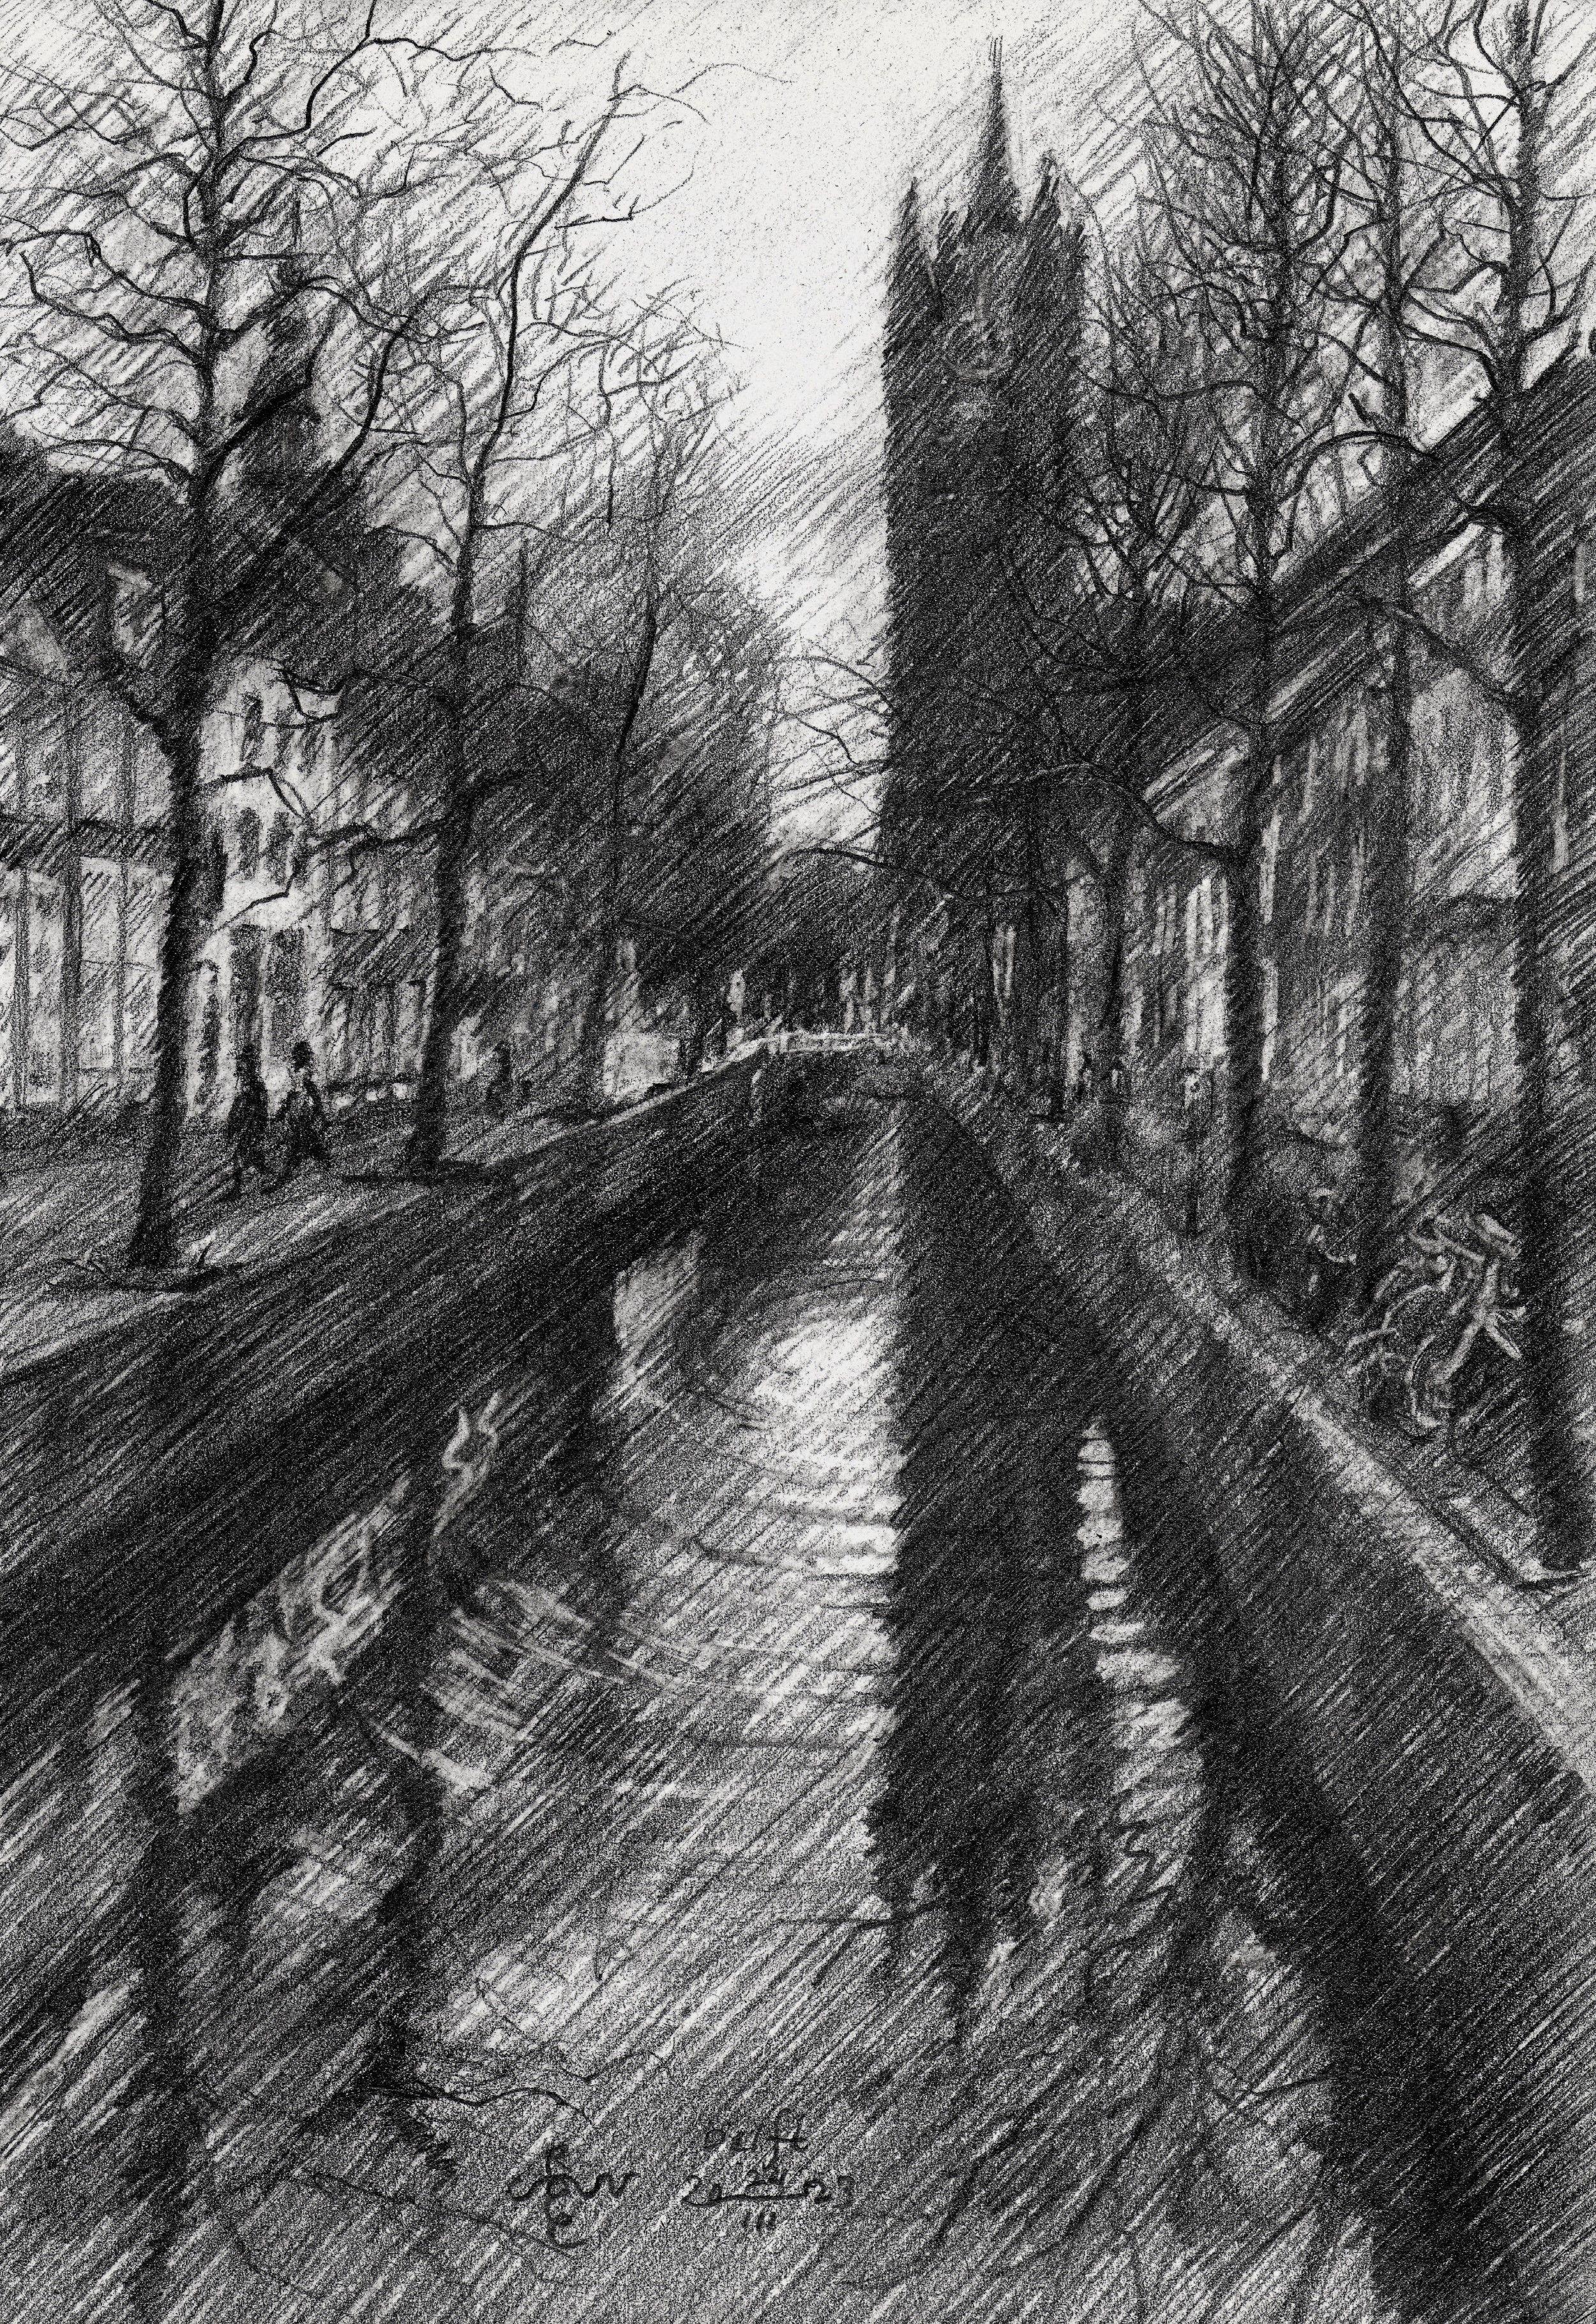 Delft - 24-03-23, Drawing, Pencil/Colored Pencil on Paper - Art by Corne Akkers